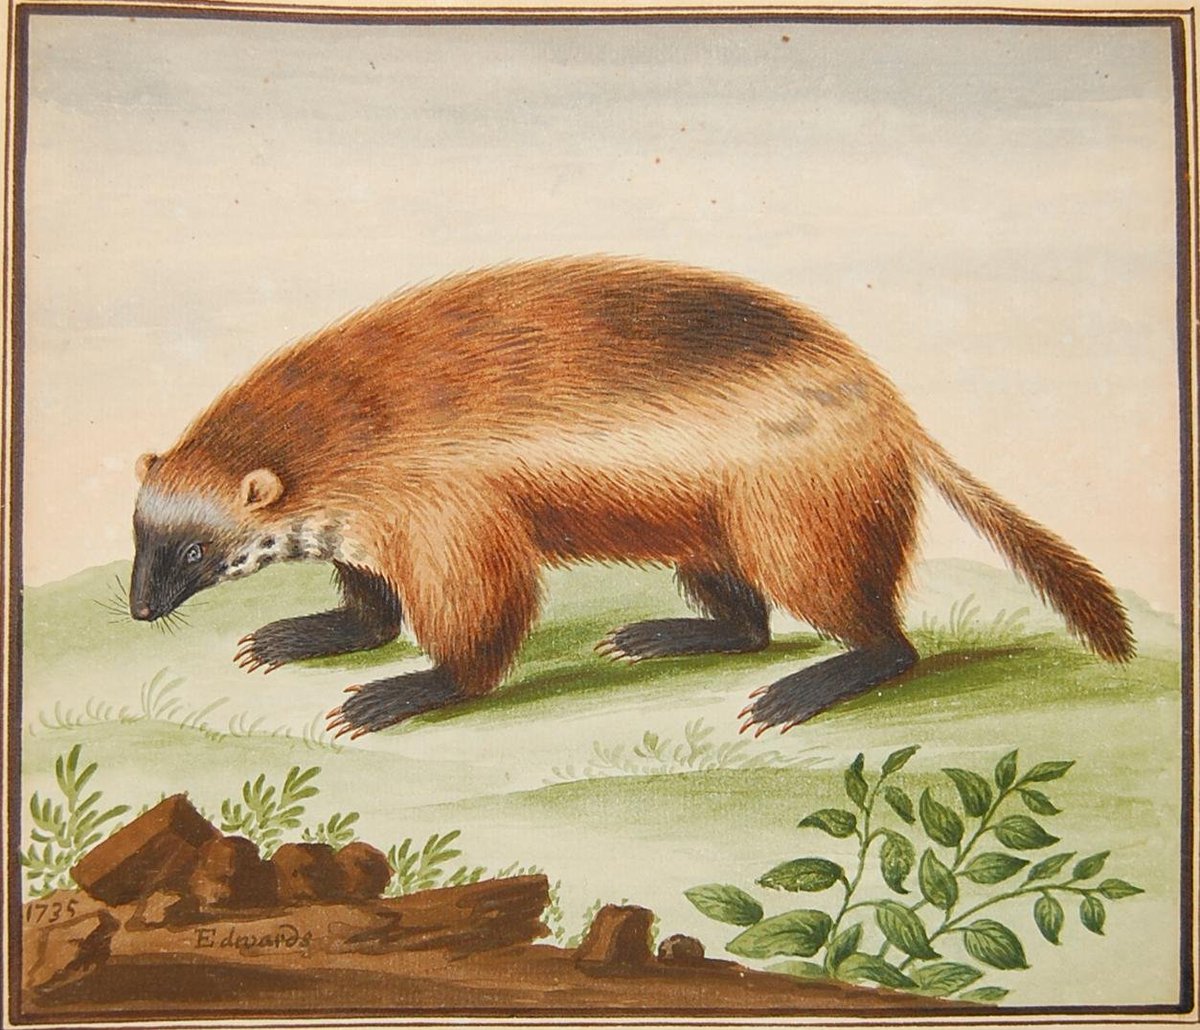 Continuing  #NationalPetMonth and here's a 1735 painting of Sir Hans Sloane's pet wolverine ( @britishmuseum). The wolverine, brought from Hudson Bay, had only one eye and would walk in a circle every few paces, but insisted on following Sloane everywhere in the house 'like a Dog'.